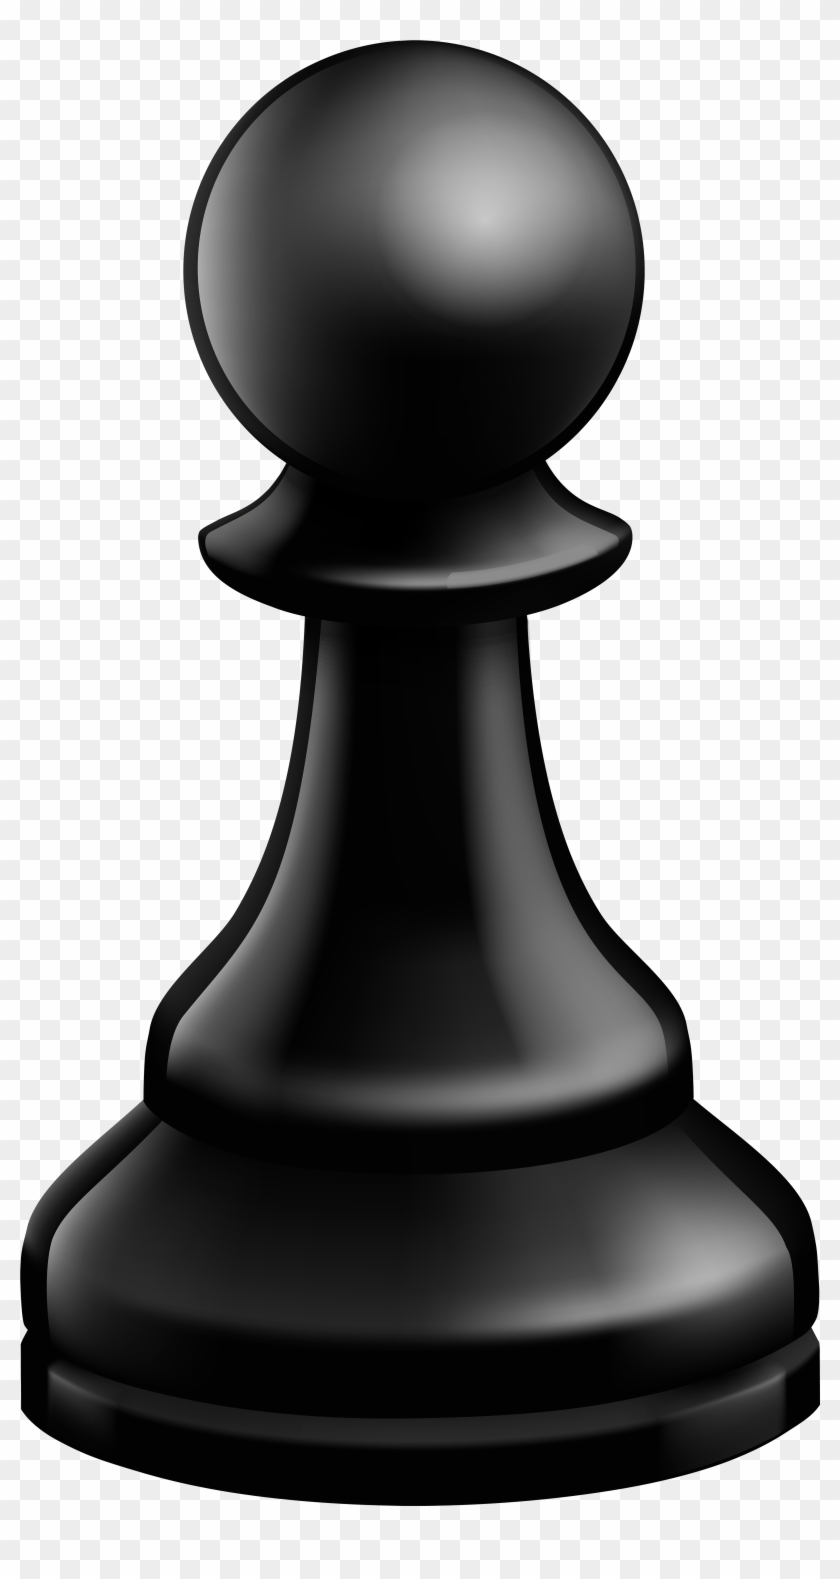 Pawn Black Chess Piece Png Clip Art - Pawn Chess Piece Png Transparent Png